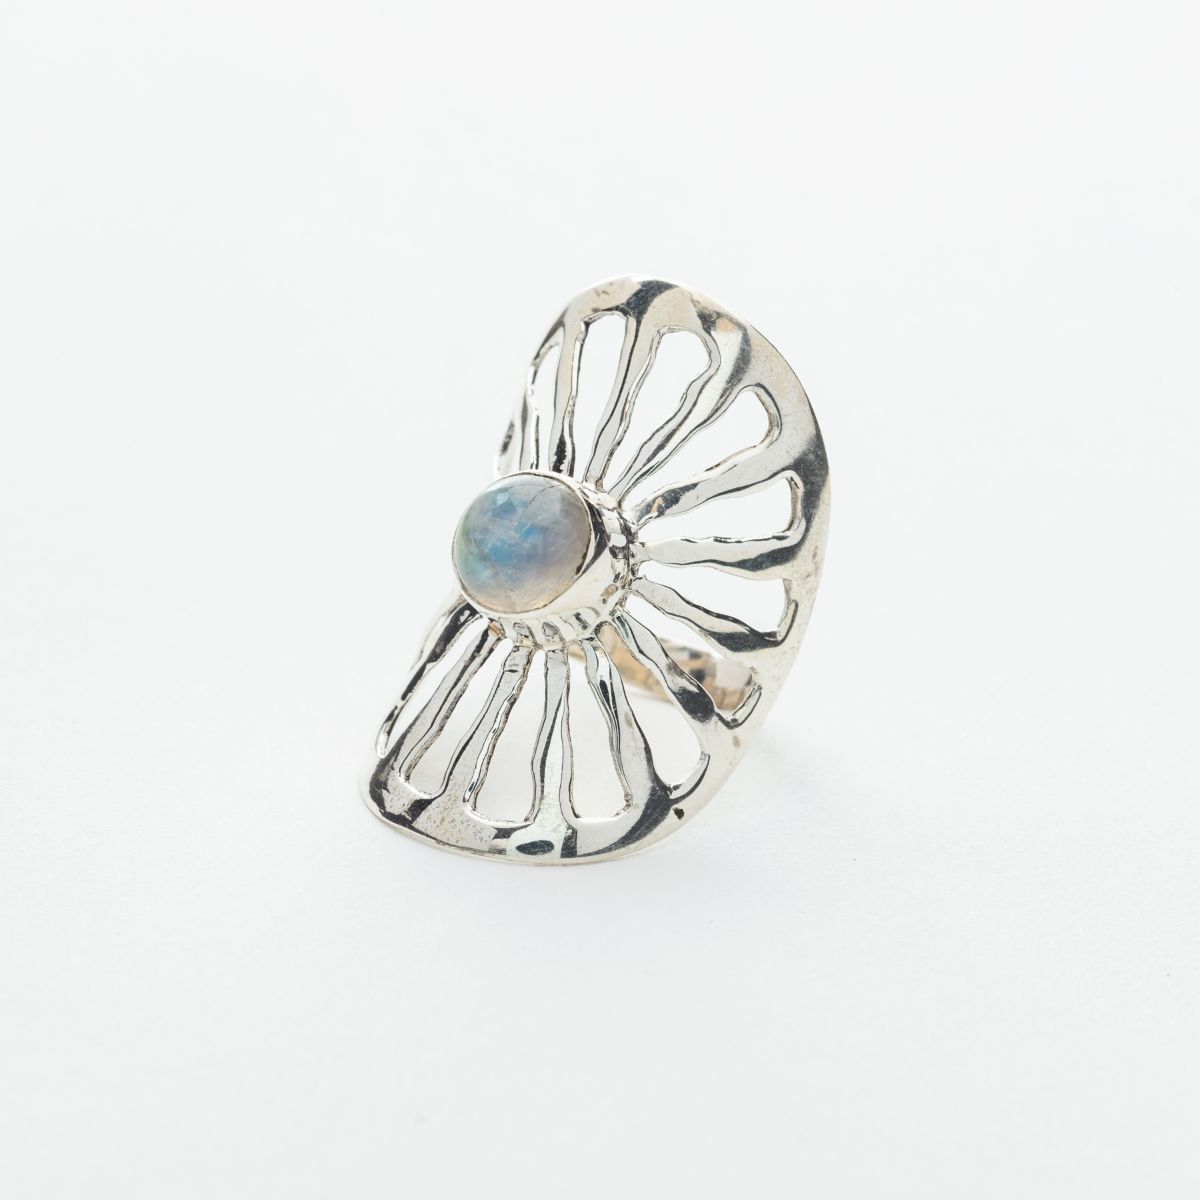 Statement Rainbow Moonstone Ring in Silver